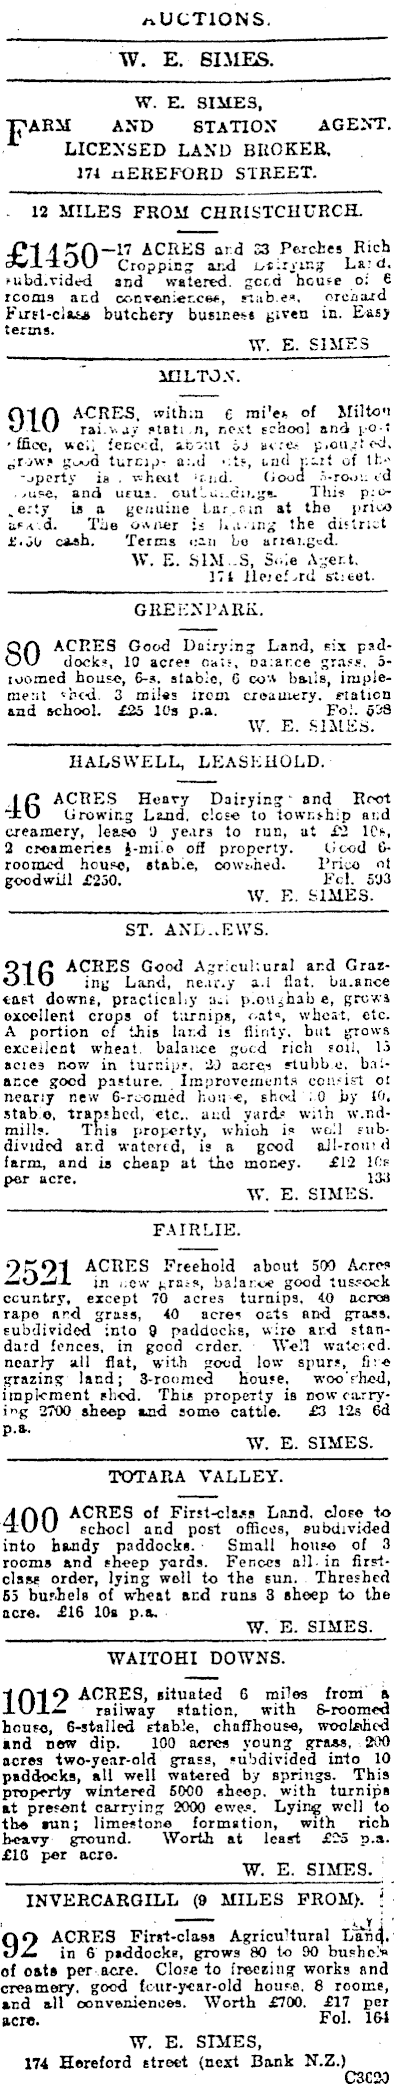 Papers Past Newspapers Press 8 August 1908 Page 15 Advertisements Column 3